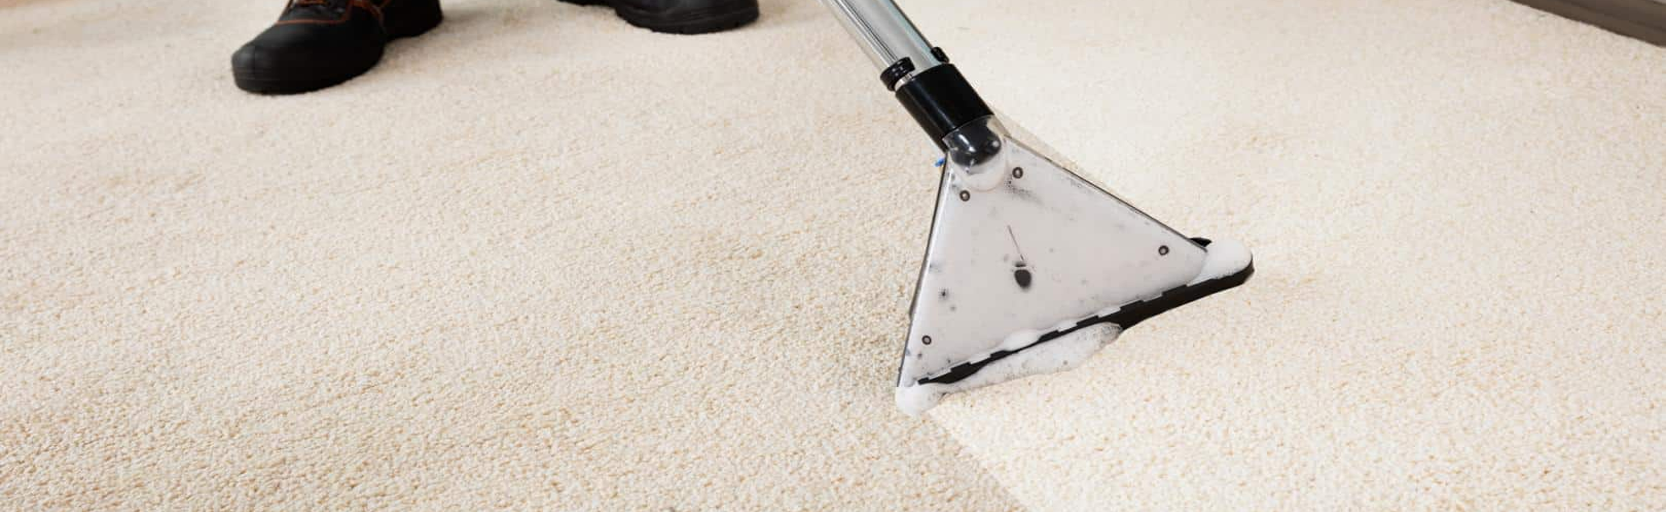 GCarpet Cleaning after Renovation